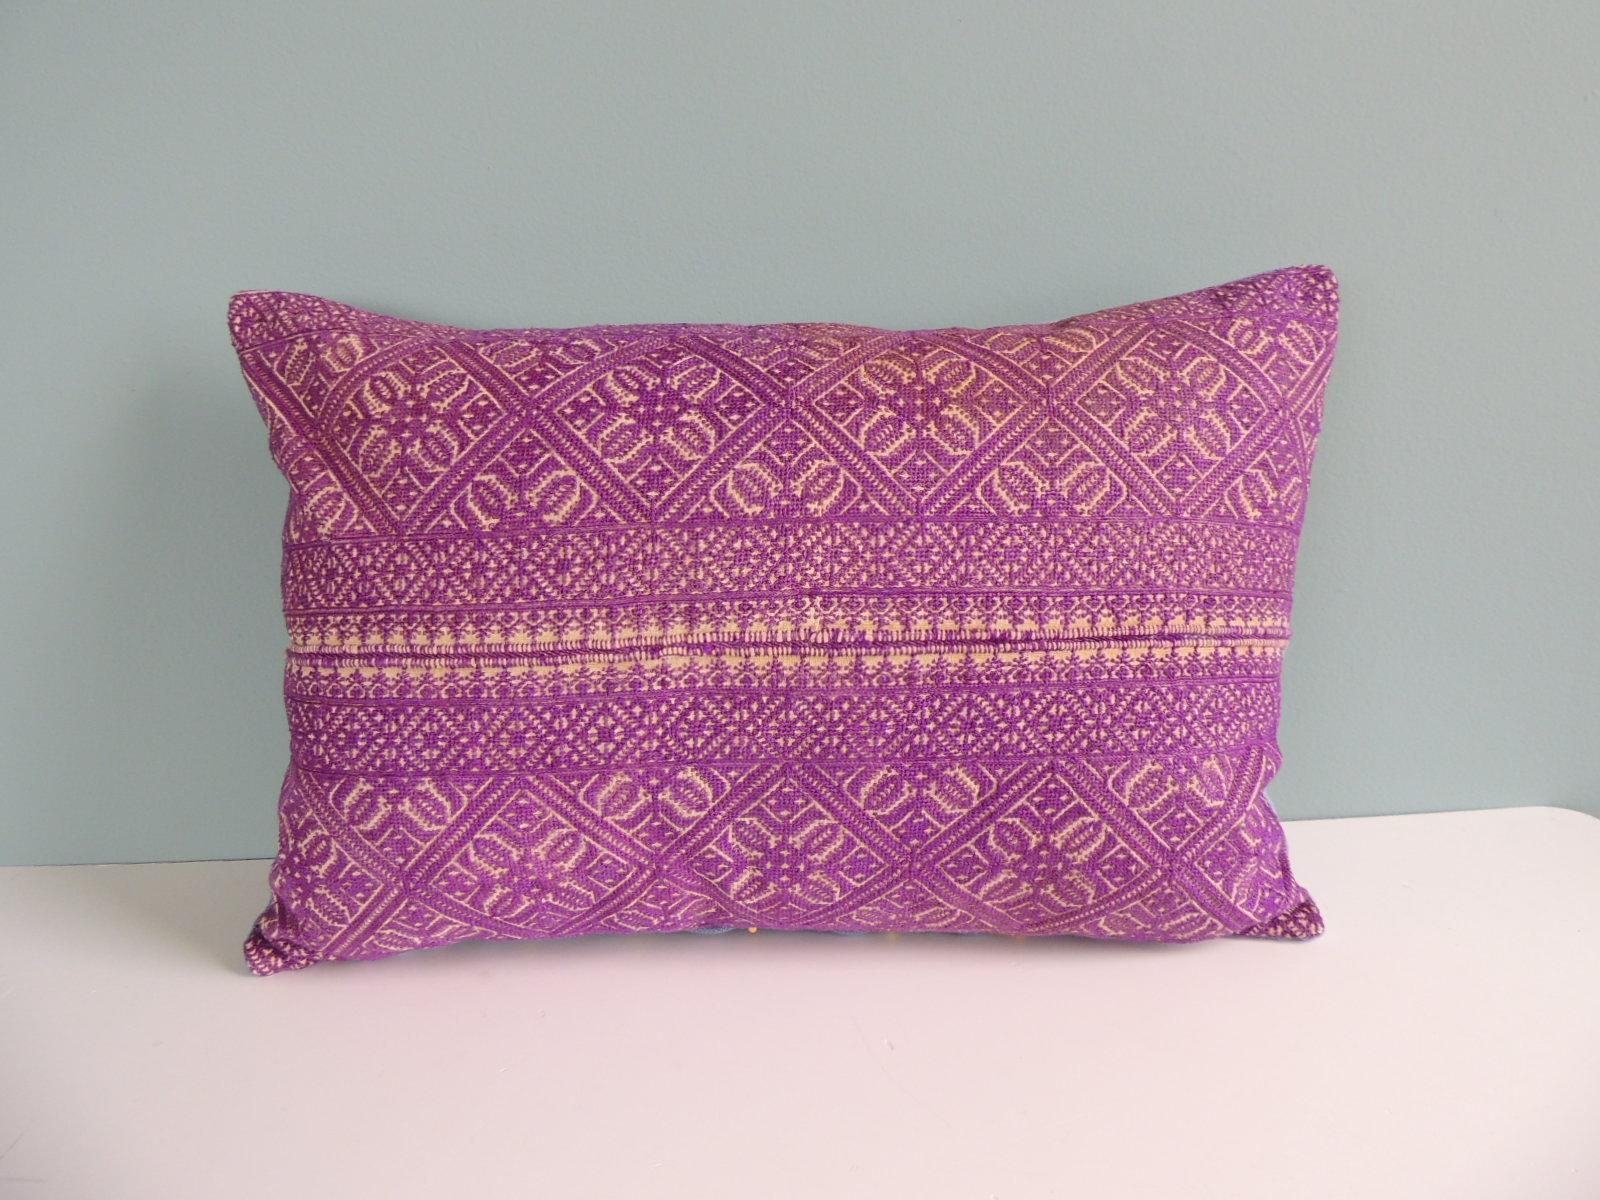 Hand-Crafted Antique Fuchsia Embroidered Fez Decorative Bolster Pillow